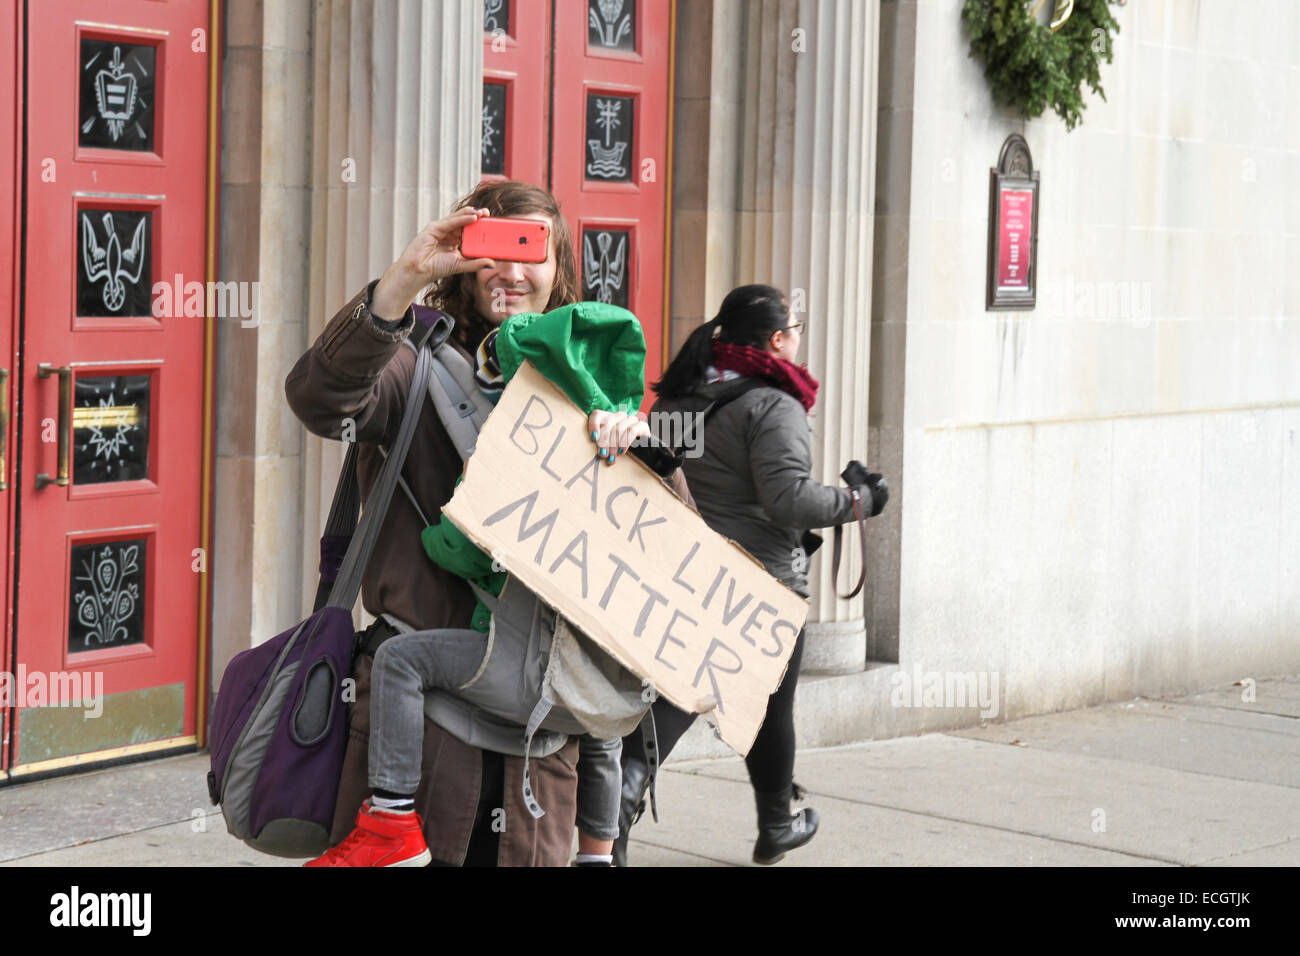 Boston, Massachusetts, USA. 13th December, 2014. An adult holding a child and 'Black Lives Matter' sign photographs marchers at the Millions March rally in Boston, Massachusetts, USA.  The protest, like those in other cities throughout the United States on this day, is in response to recent grand jury verdicts not indicting the police officers who  killed unarmed black men Michael Brown and Eric Garner, and to the longstanding problems of racism and police brutality. Credit:  Susan Pease/Alamy Live News Stock Photo